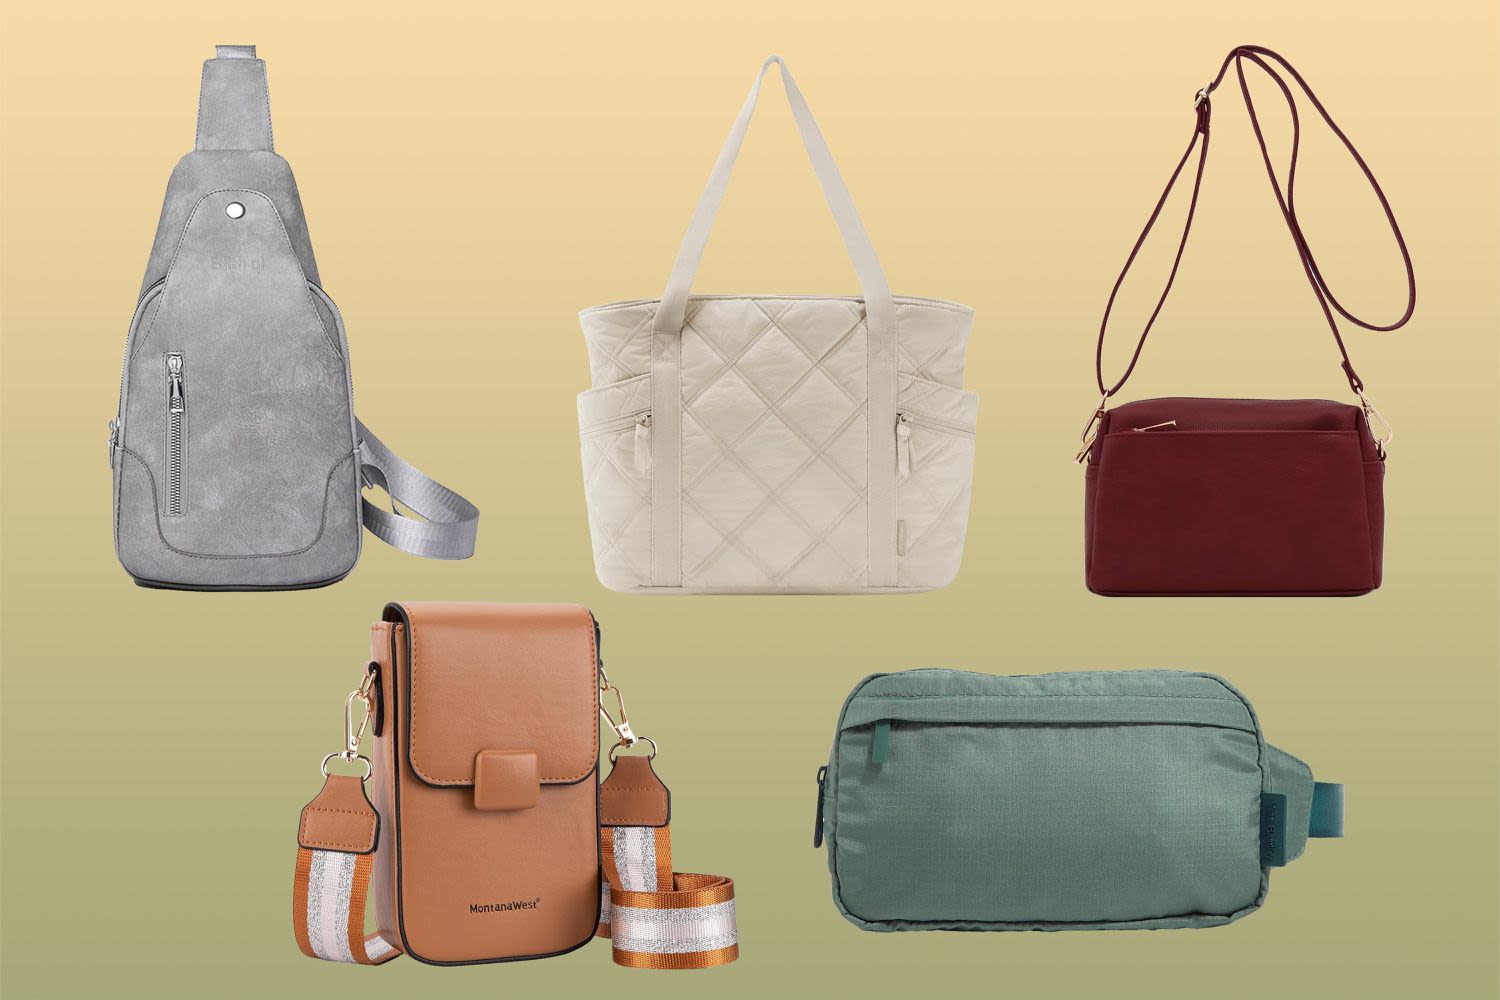 These 15 Travel Purses Are Up to 68% Off for Amazon Prime Day — Shop Vera Bradley, Michael Kors, and More